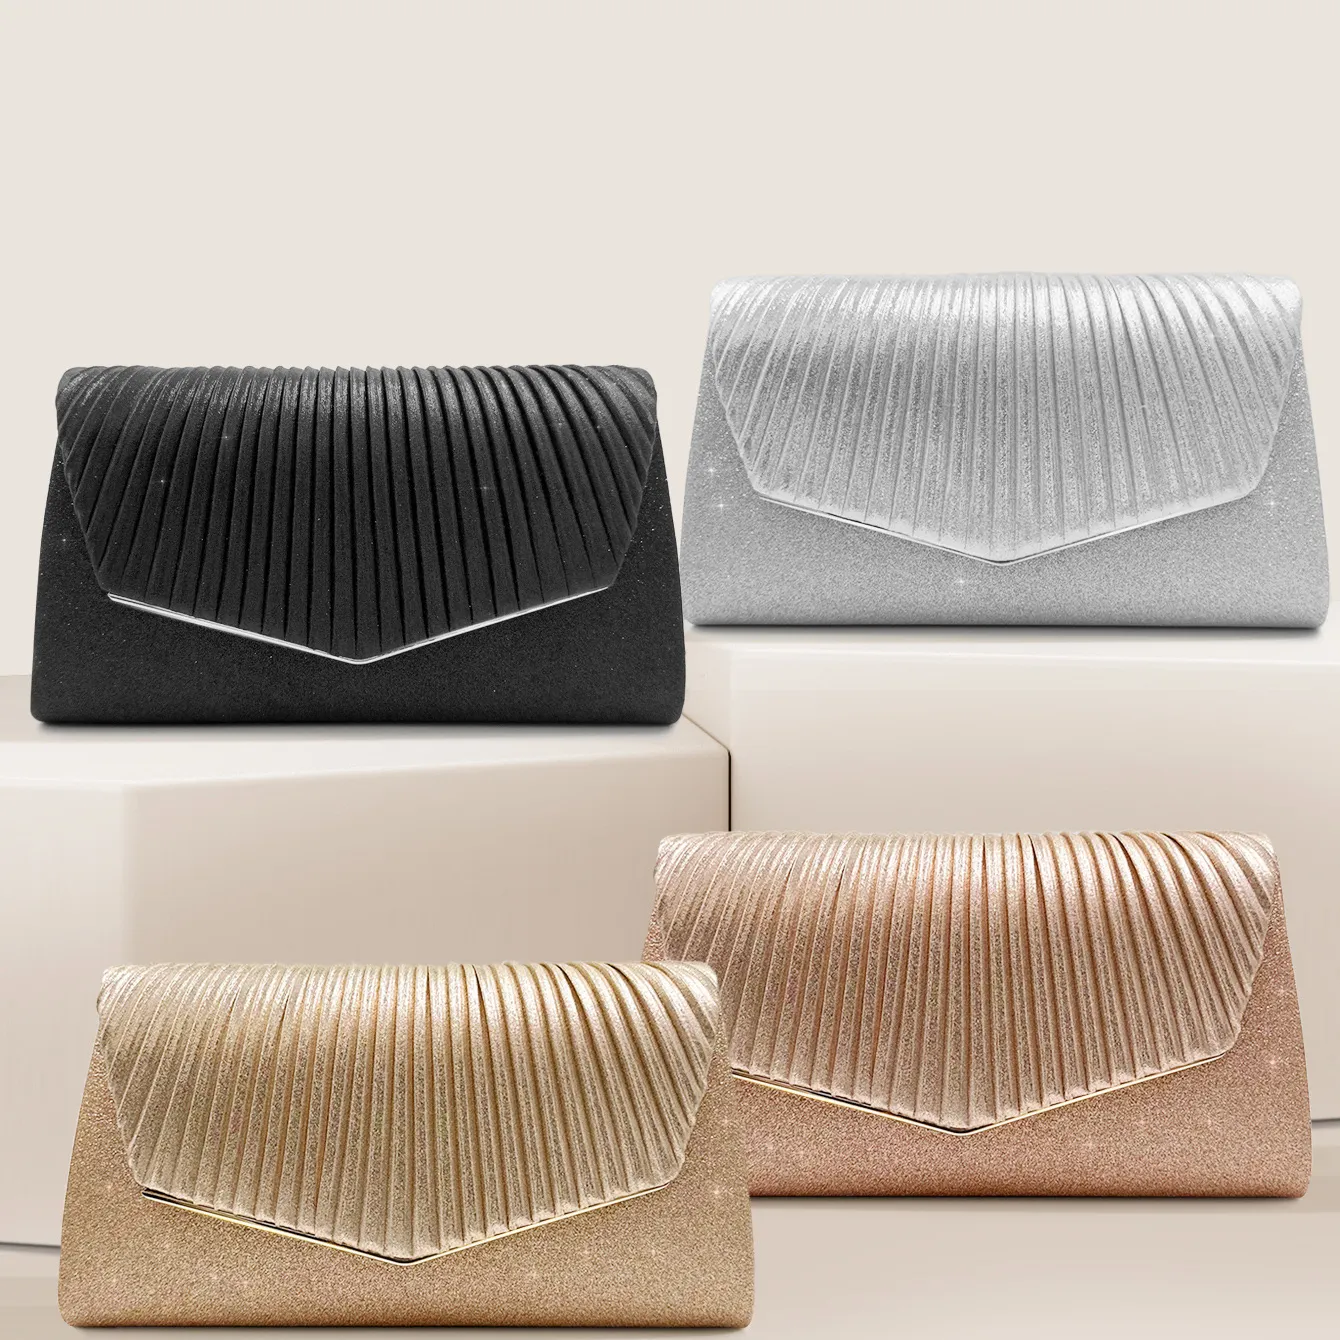 Luxury Silver Clutch Bag Envelope Hand Purse Ladies Clutch Bag Evening Shiny Clutch Evening Dress Classic Party Bag FE302